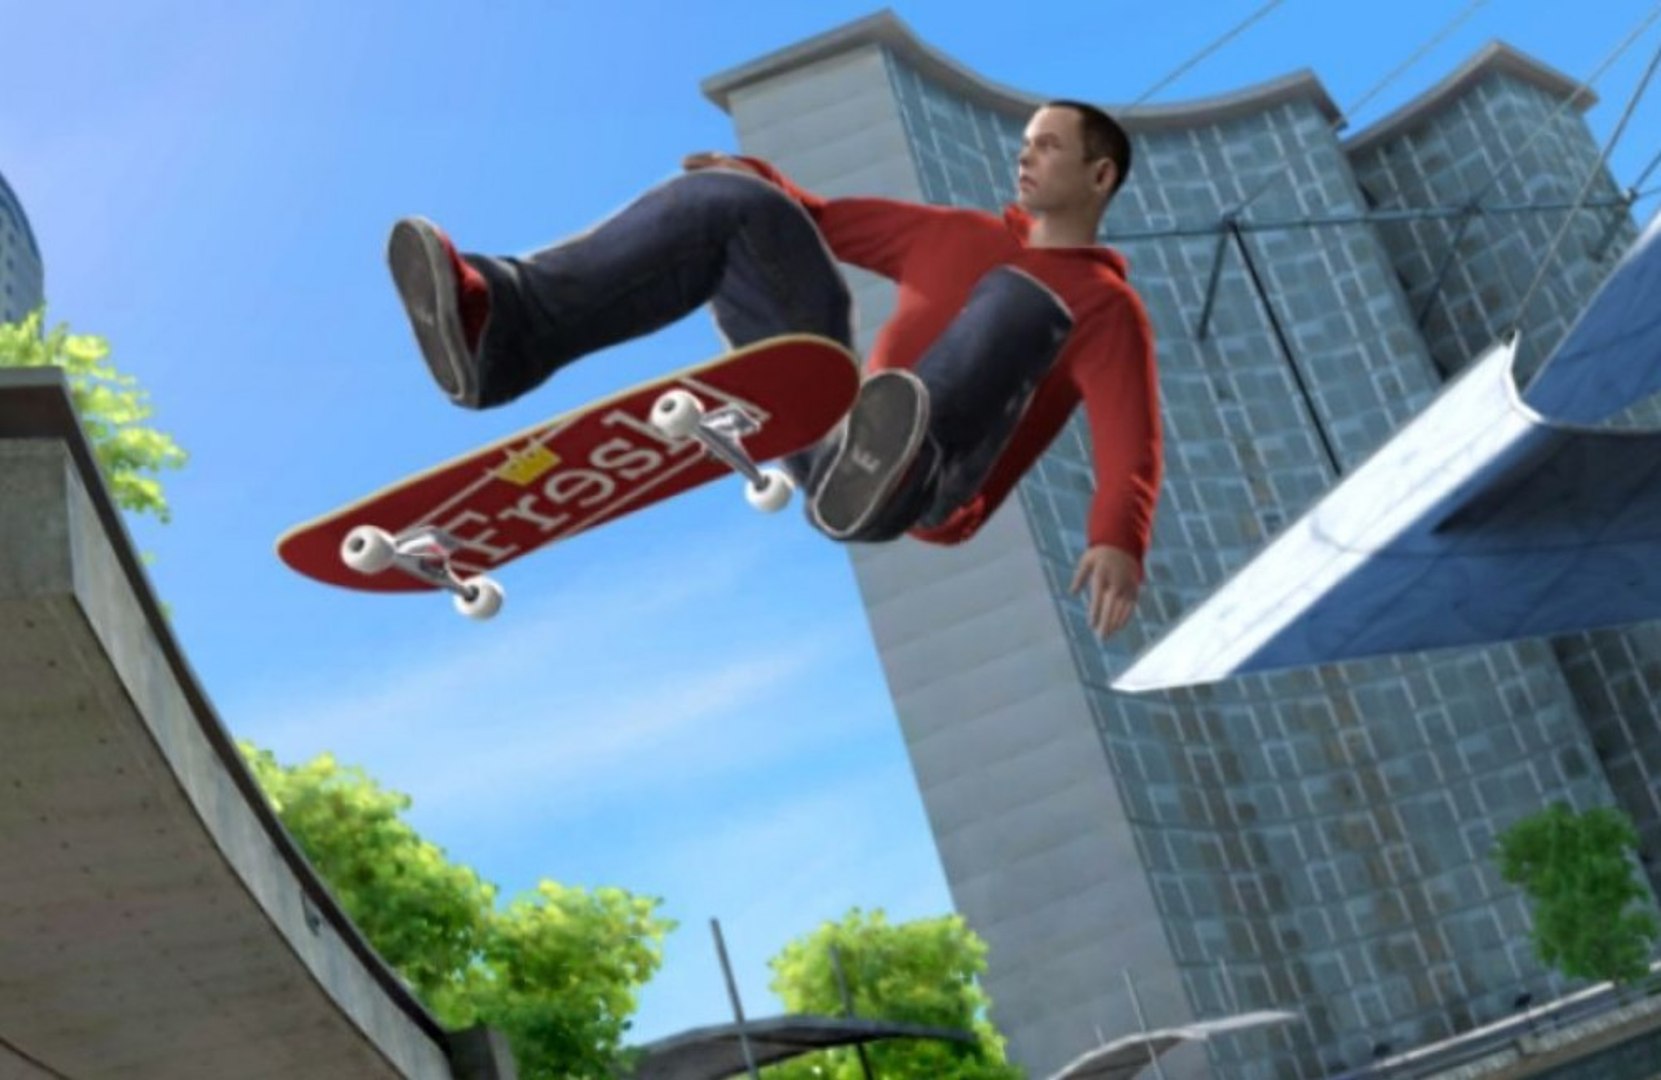 Skate 4 playtest cracked and circulated online - video Dailymotion